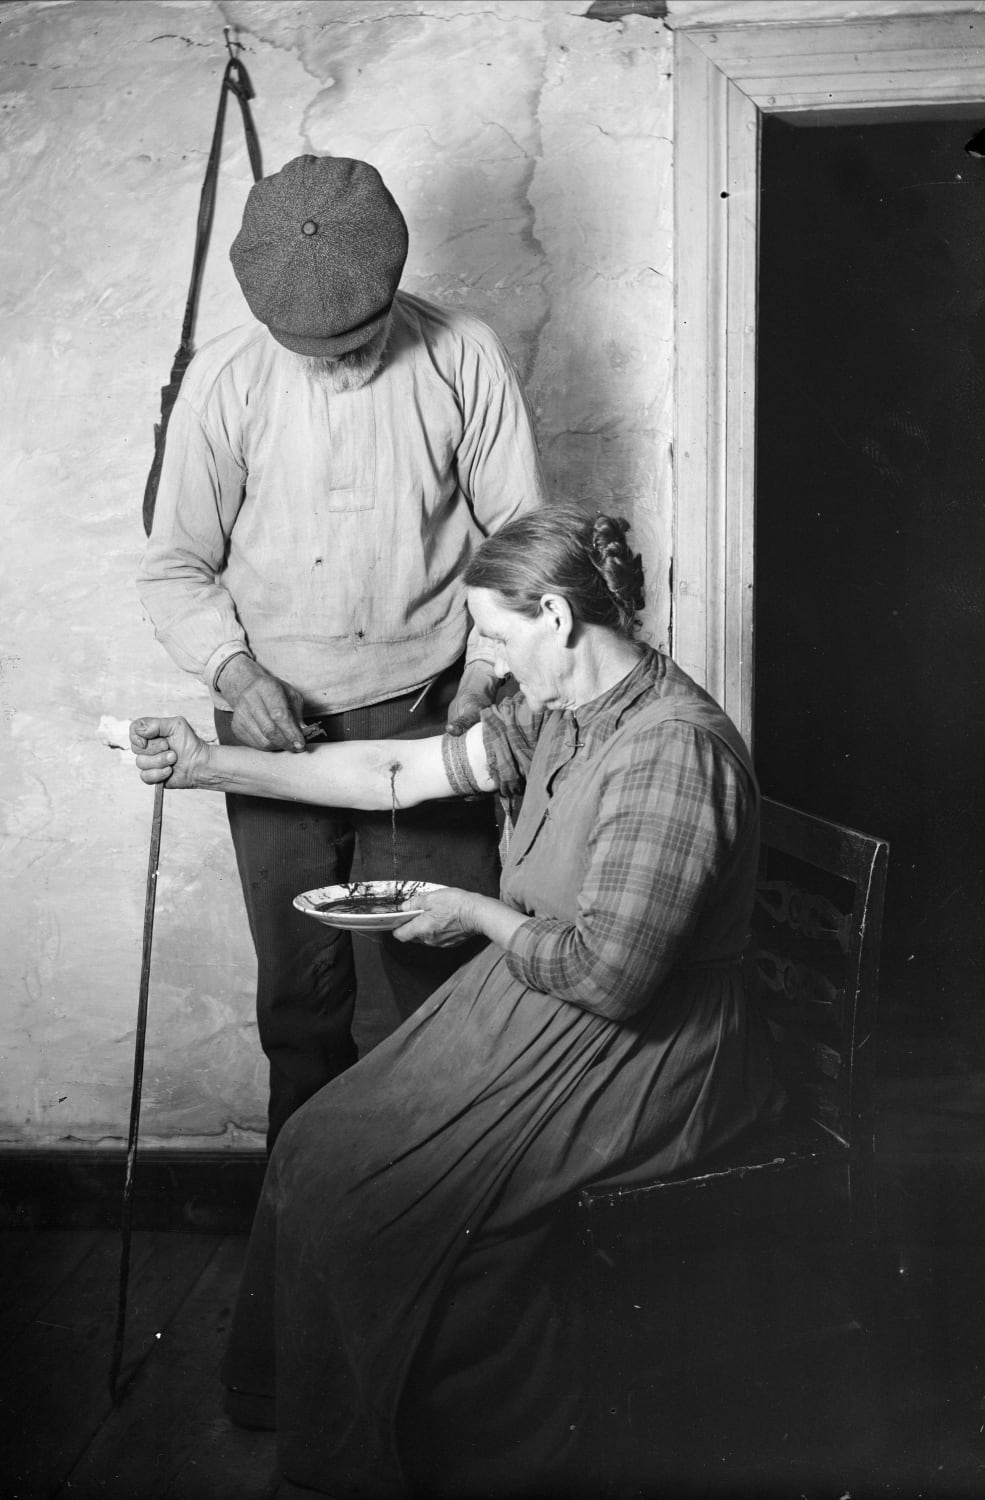 A rare depiction of bloodletting, which remained a part of folk medicine long after the introduction of modern medicine. Mangskog, Sweden in 1922